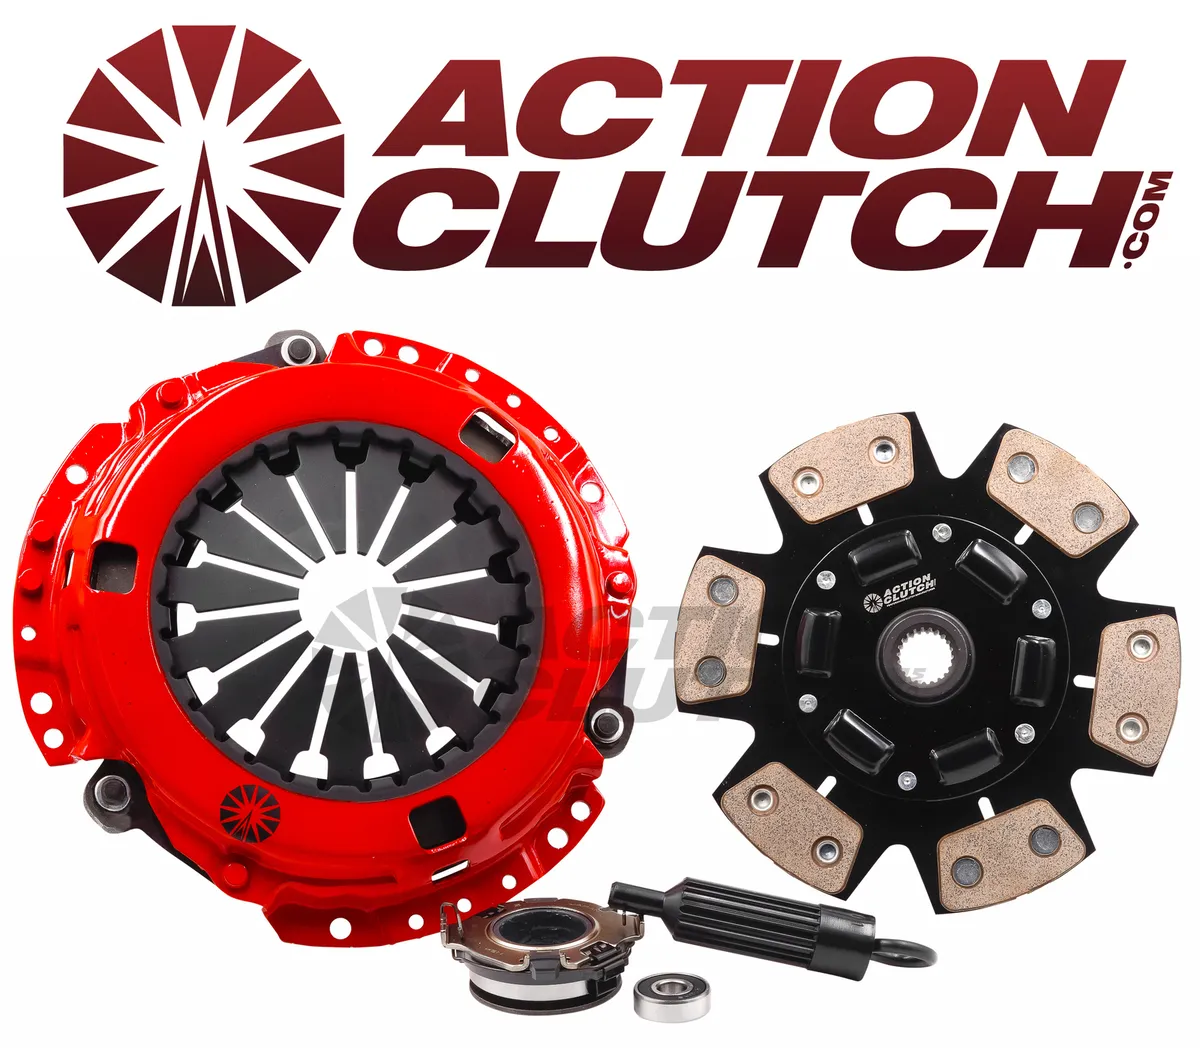 Manual Transmission Clutch Chatter